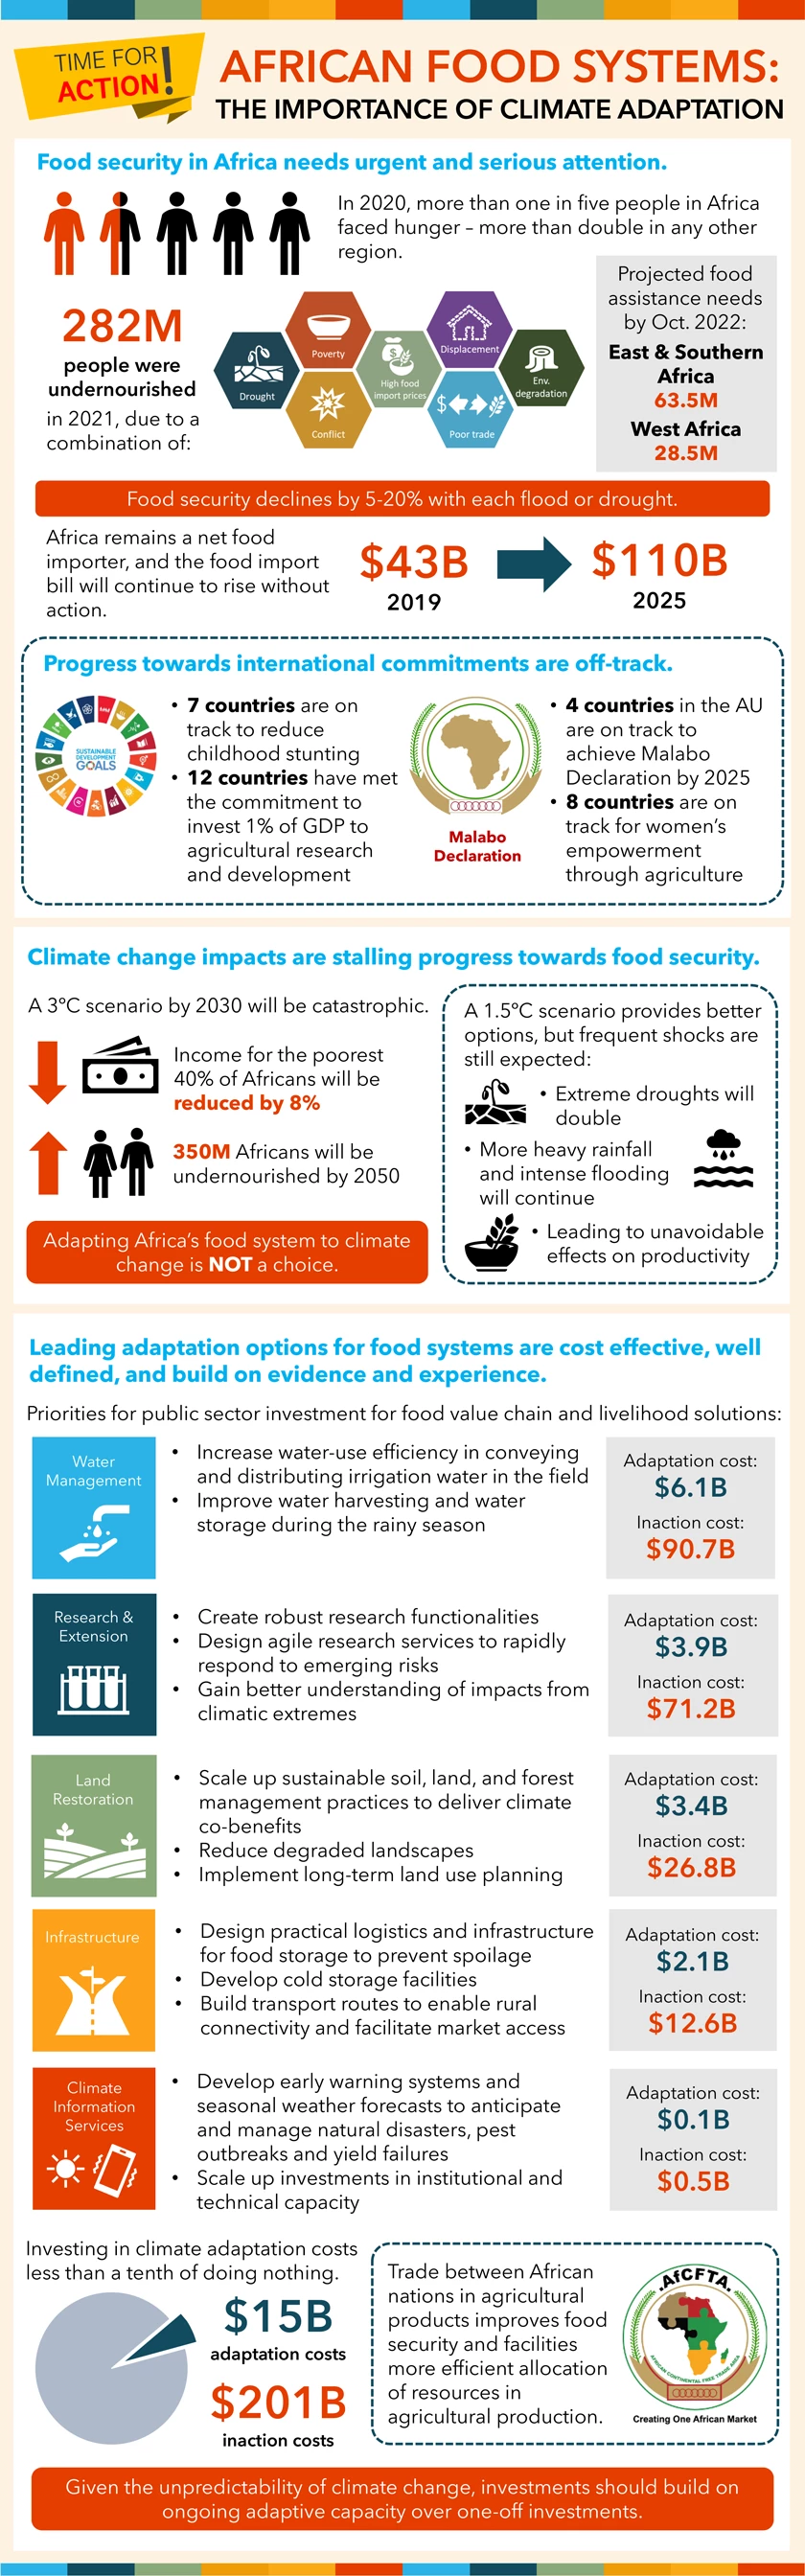 African Food System: The Importance of Climate Adaptation